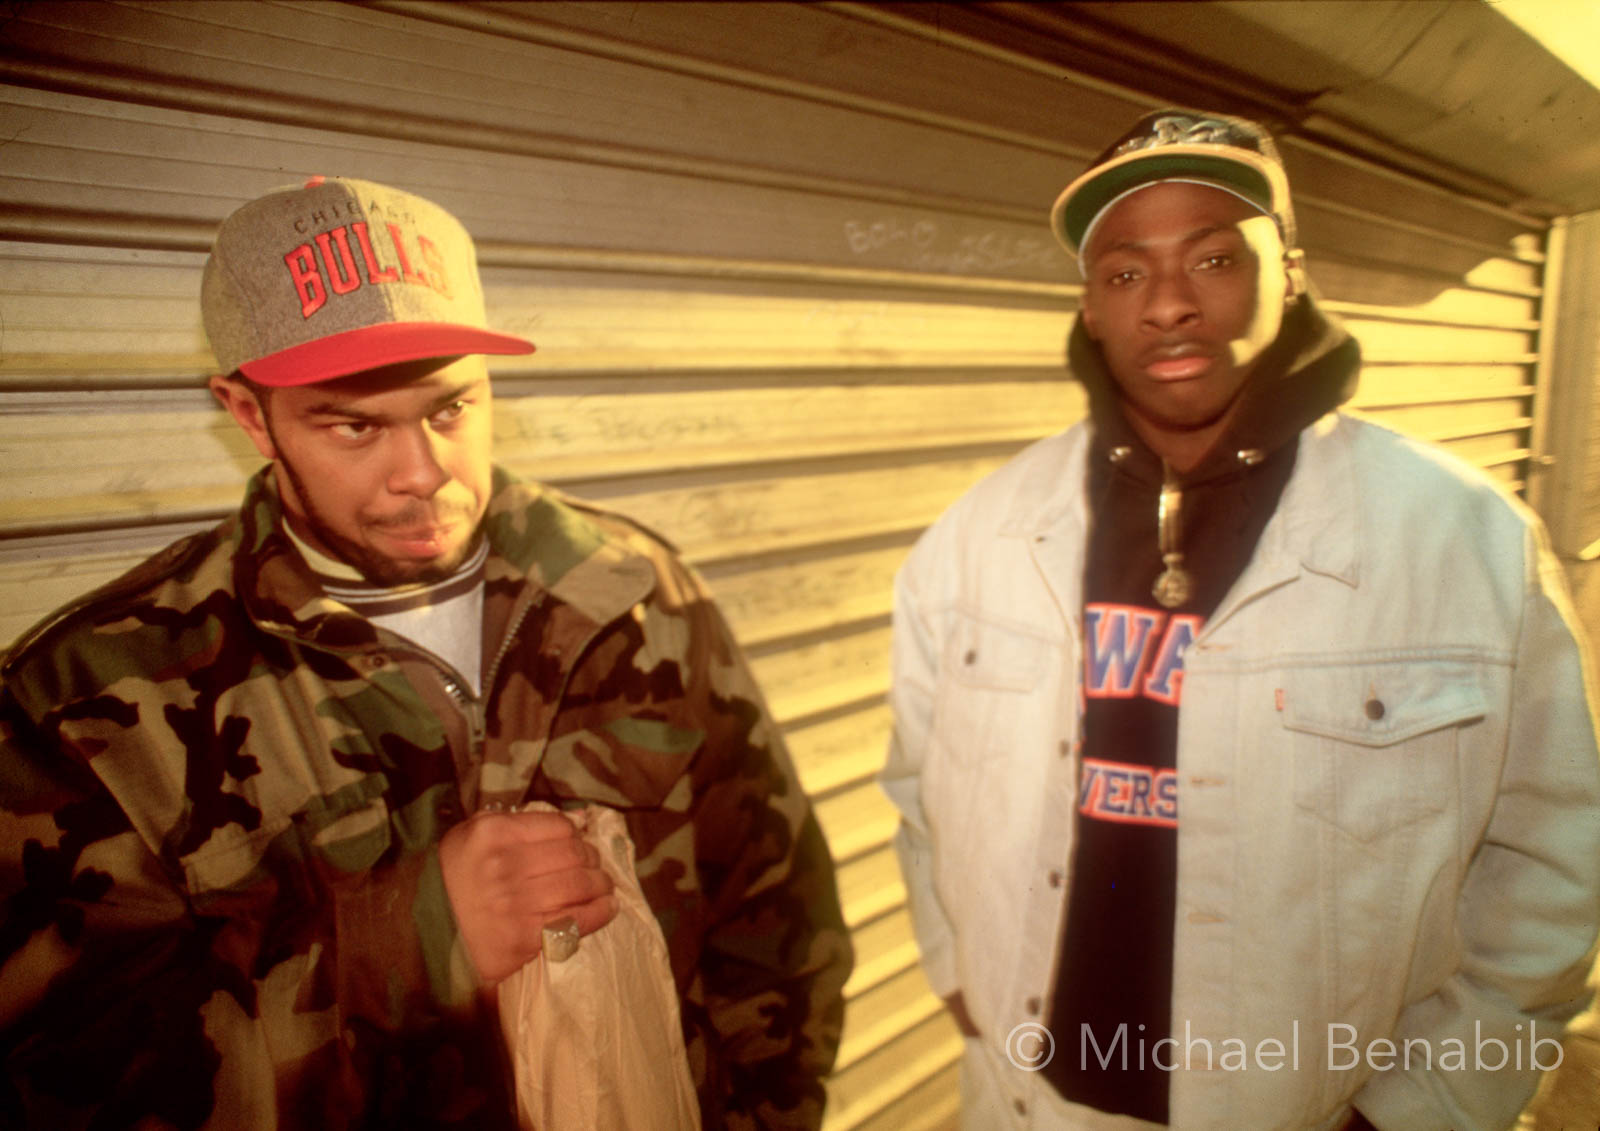 Pete Rock and CL Smooth